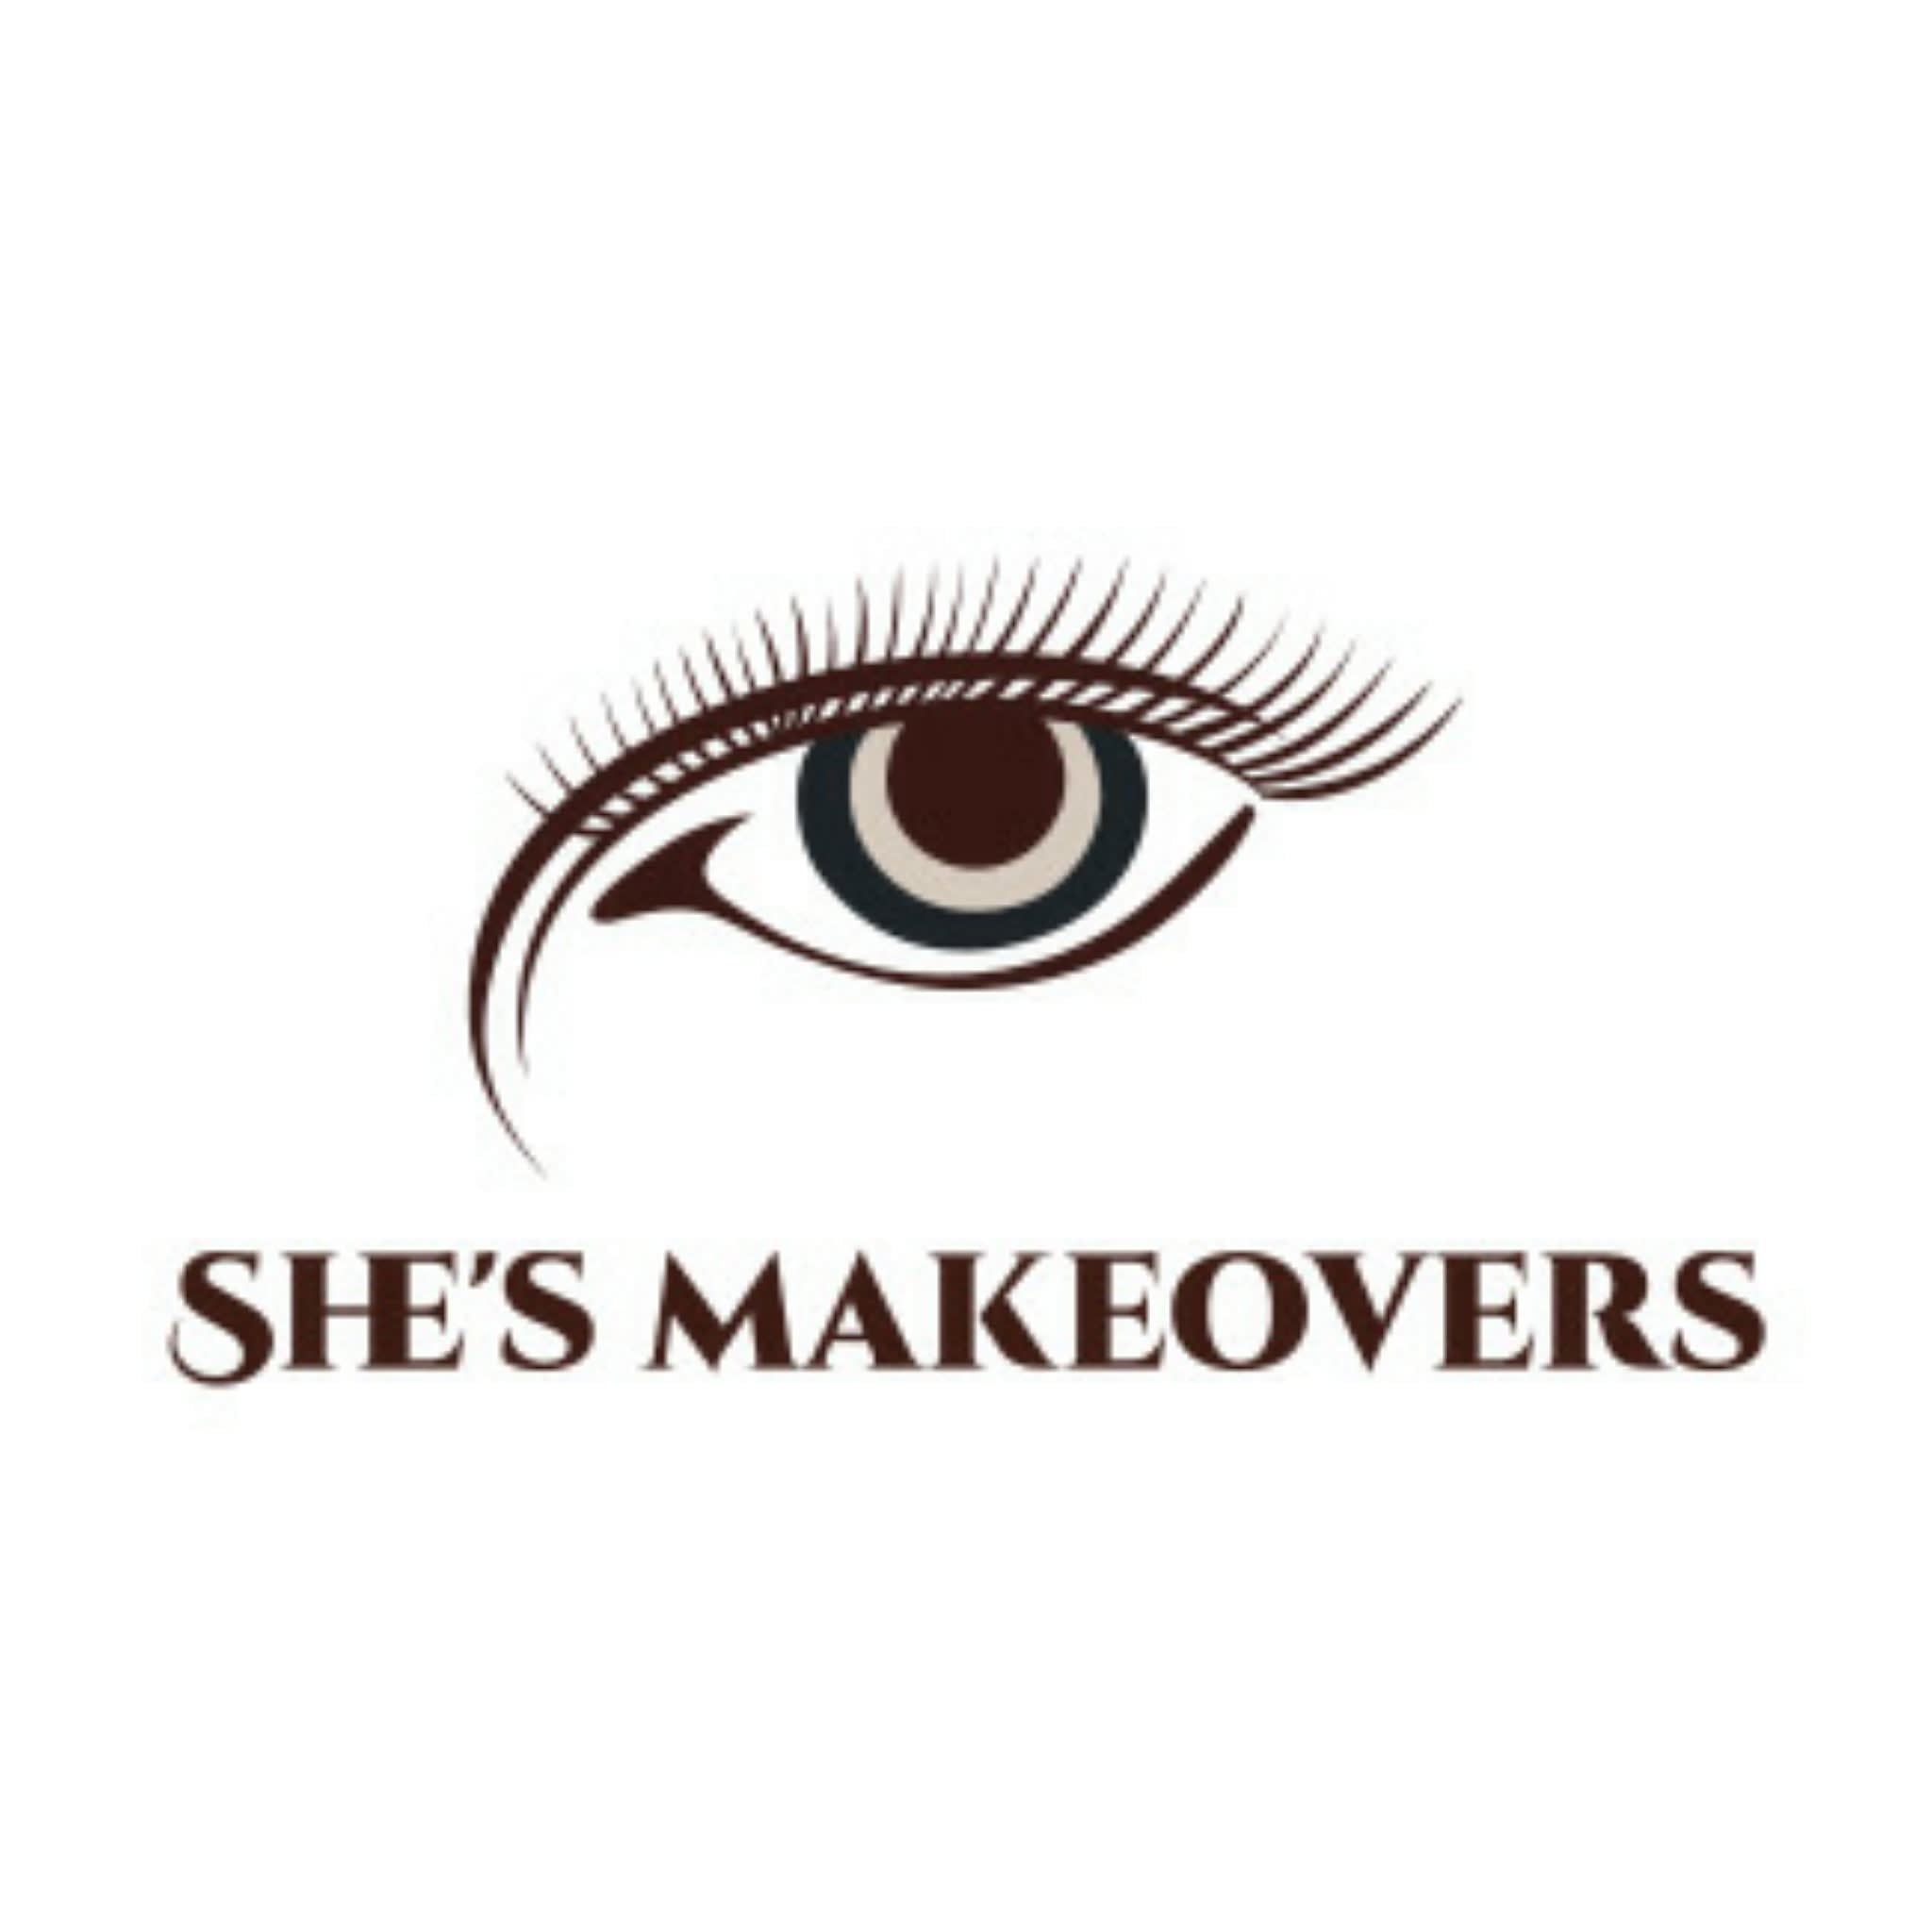 Shes Makeovers